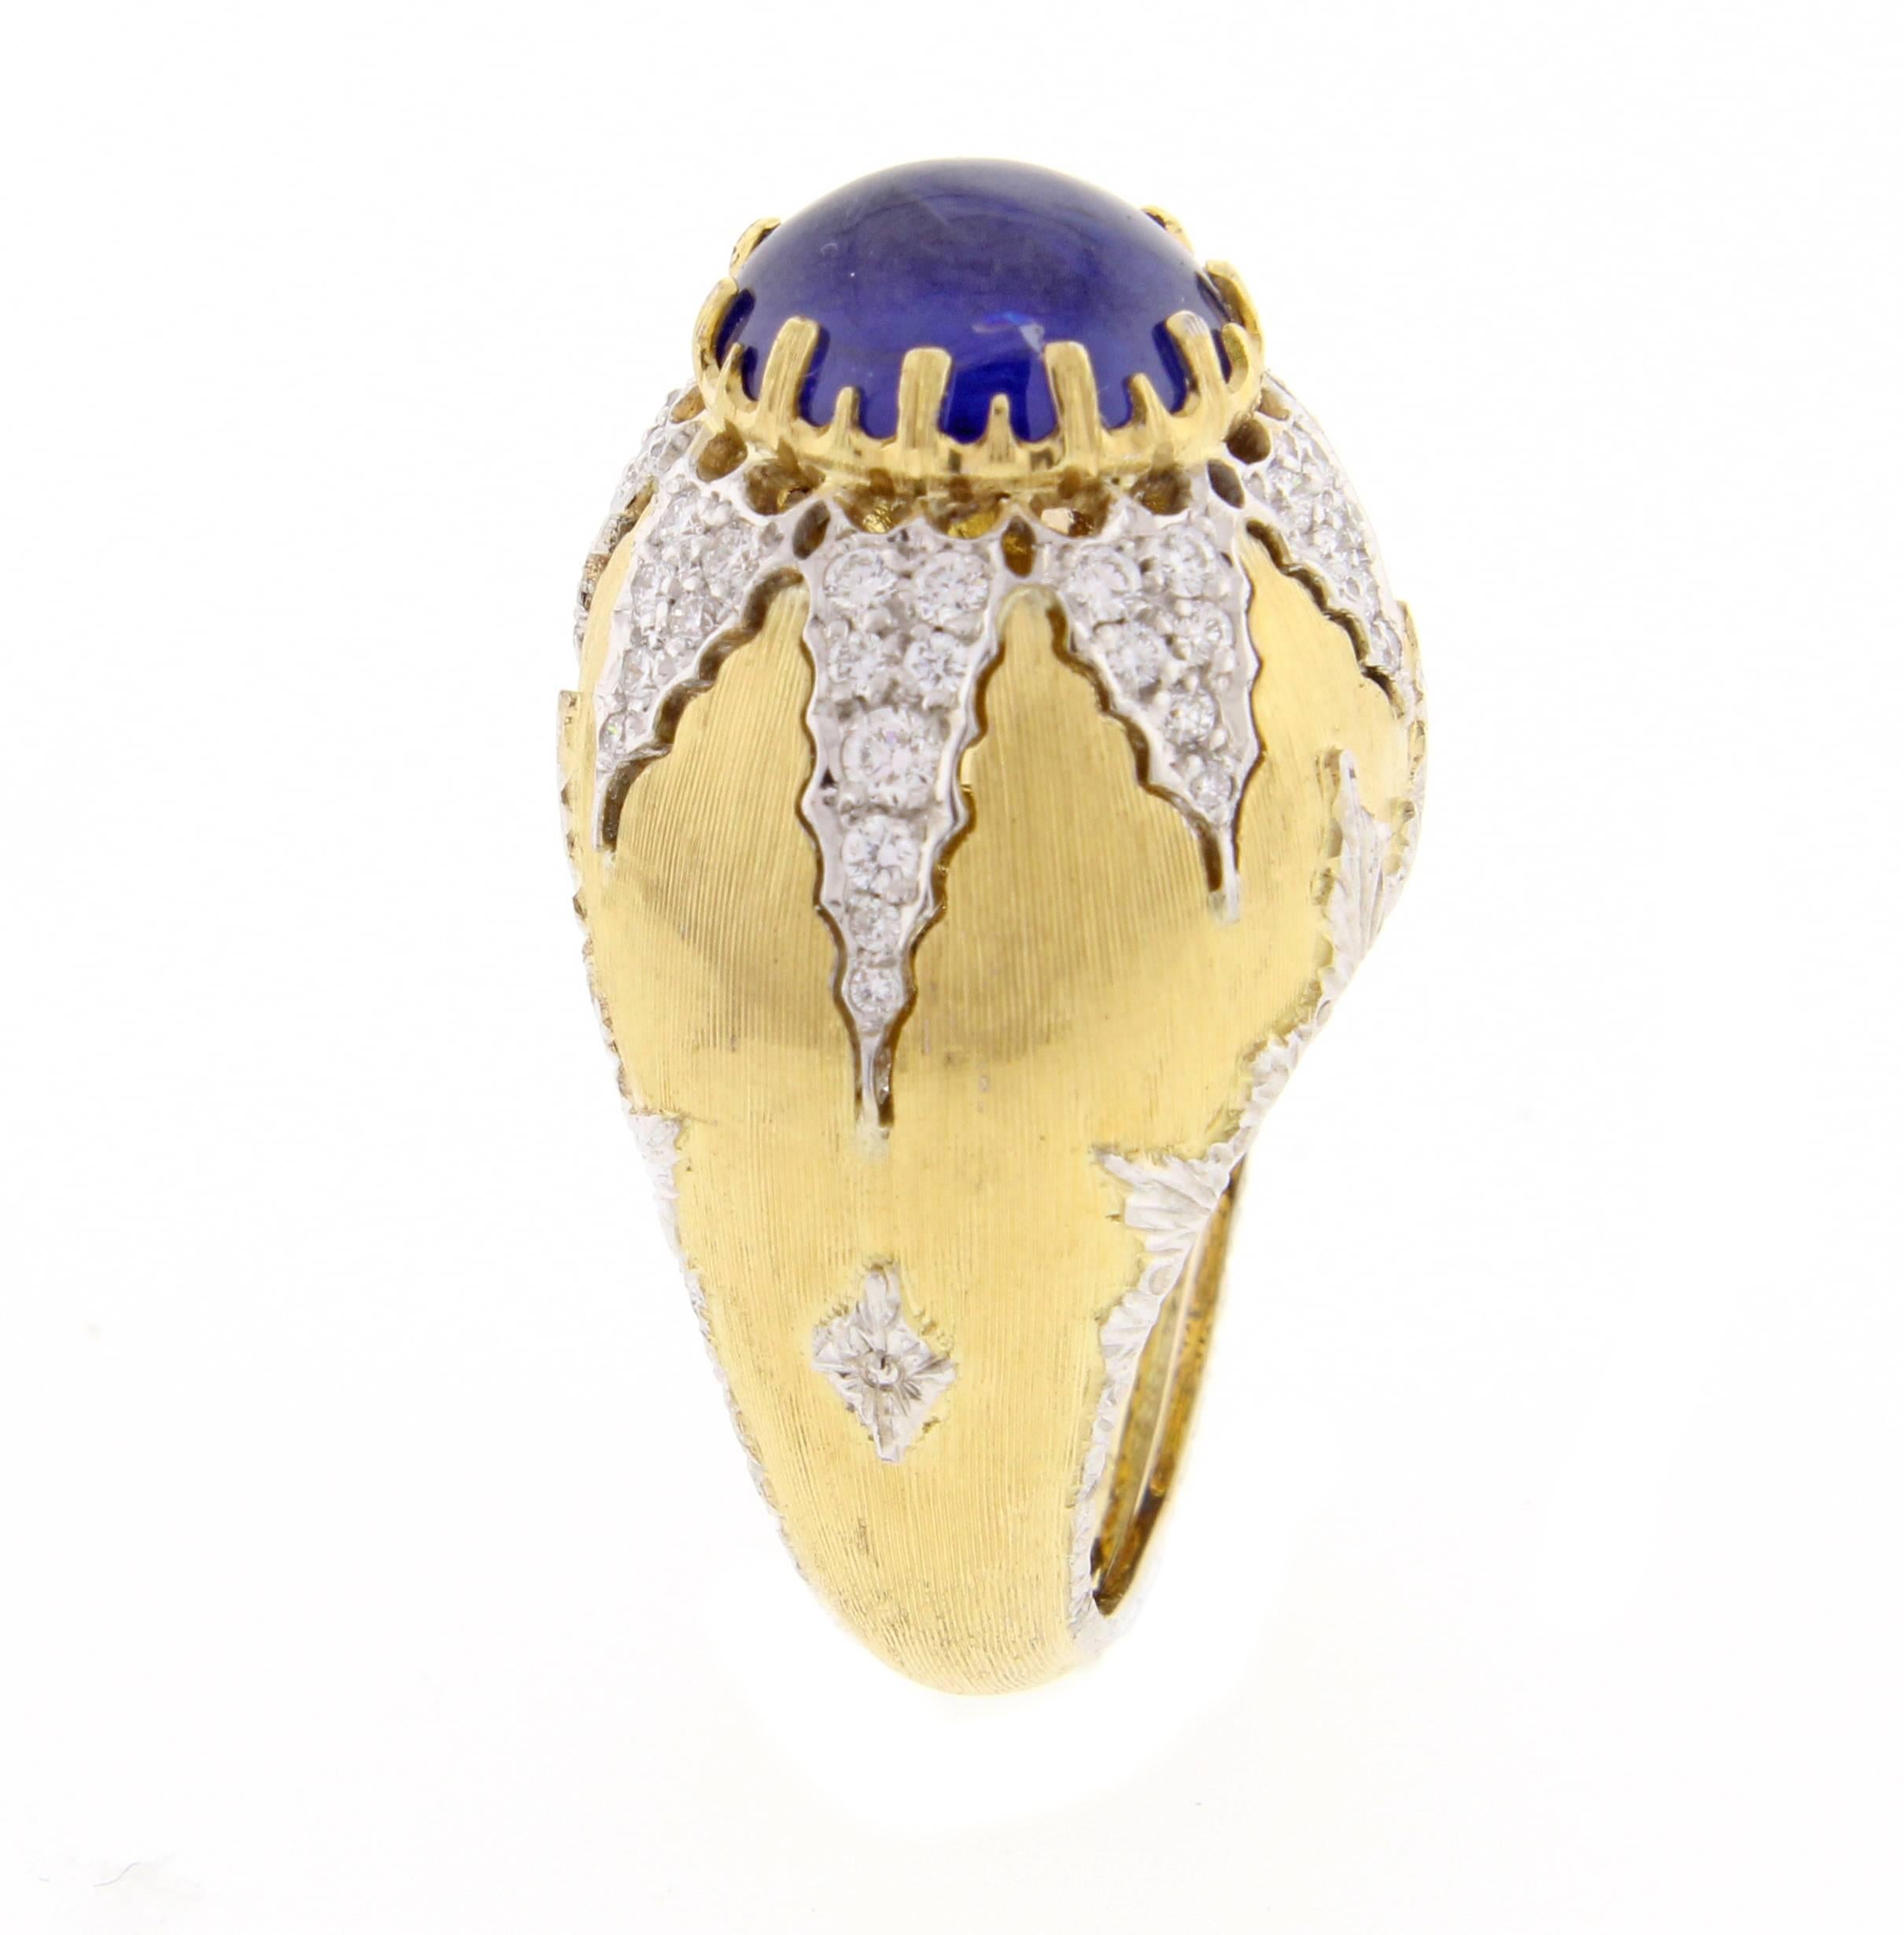 Mario Buccellati is known as the “Prince of Goldsmiths” for his handcrafted jewelry with intricate patterns and engravings. This very special ring features a cabochon sapphire weighing approximately 6 carats and 53 brilliant diamonds weighing .32